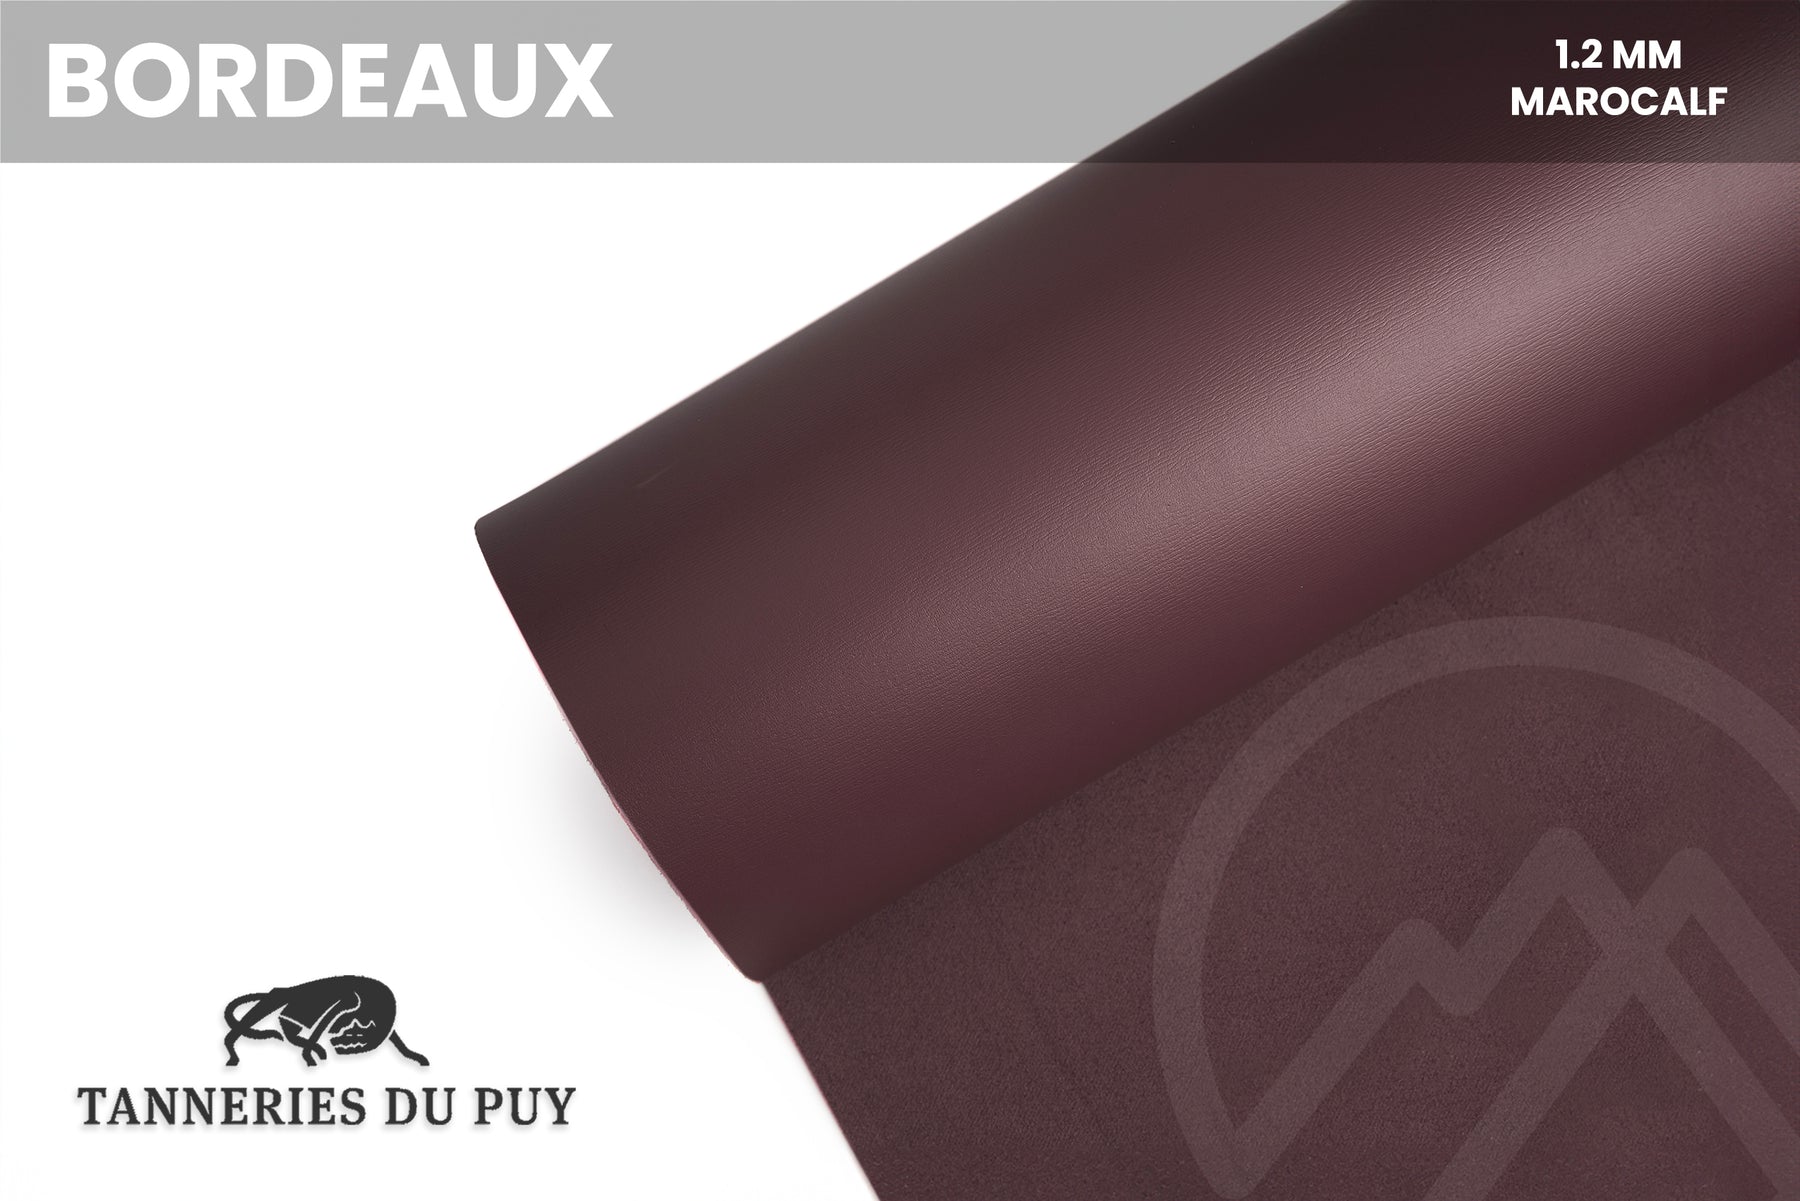 Tanneries Du Puy 🇫🇷 - Marocalf - Luxury Box Calf Leather (HIDES)